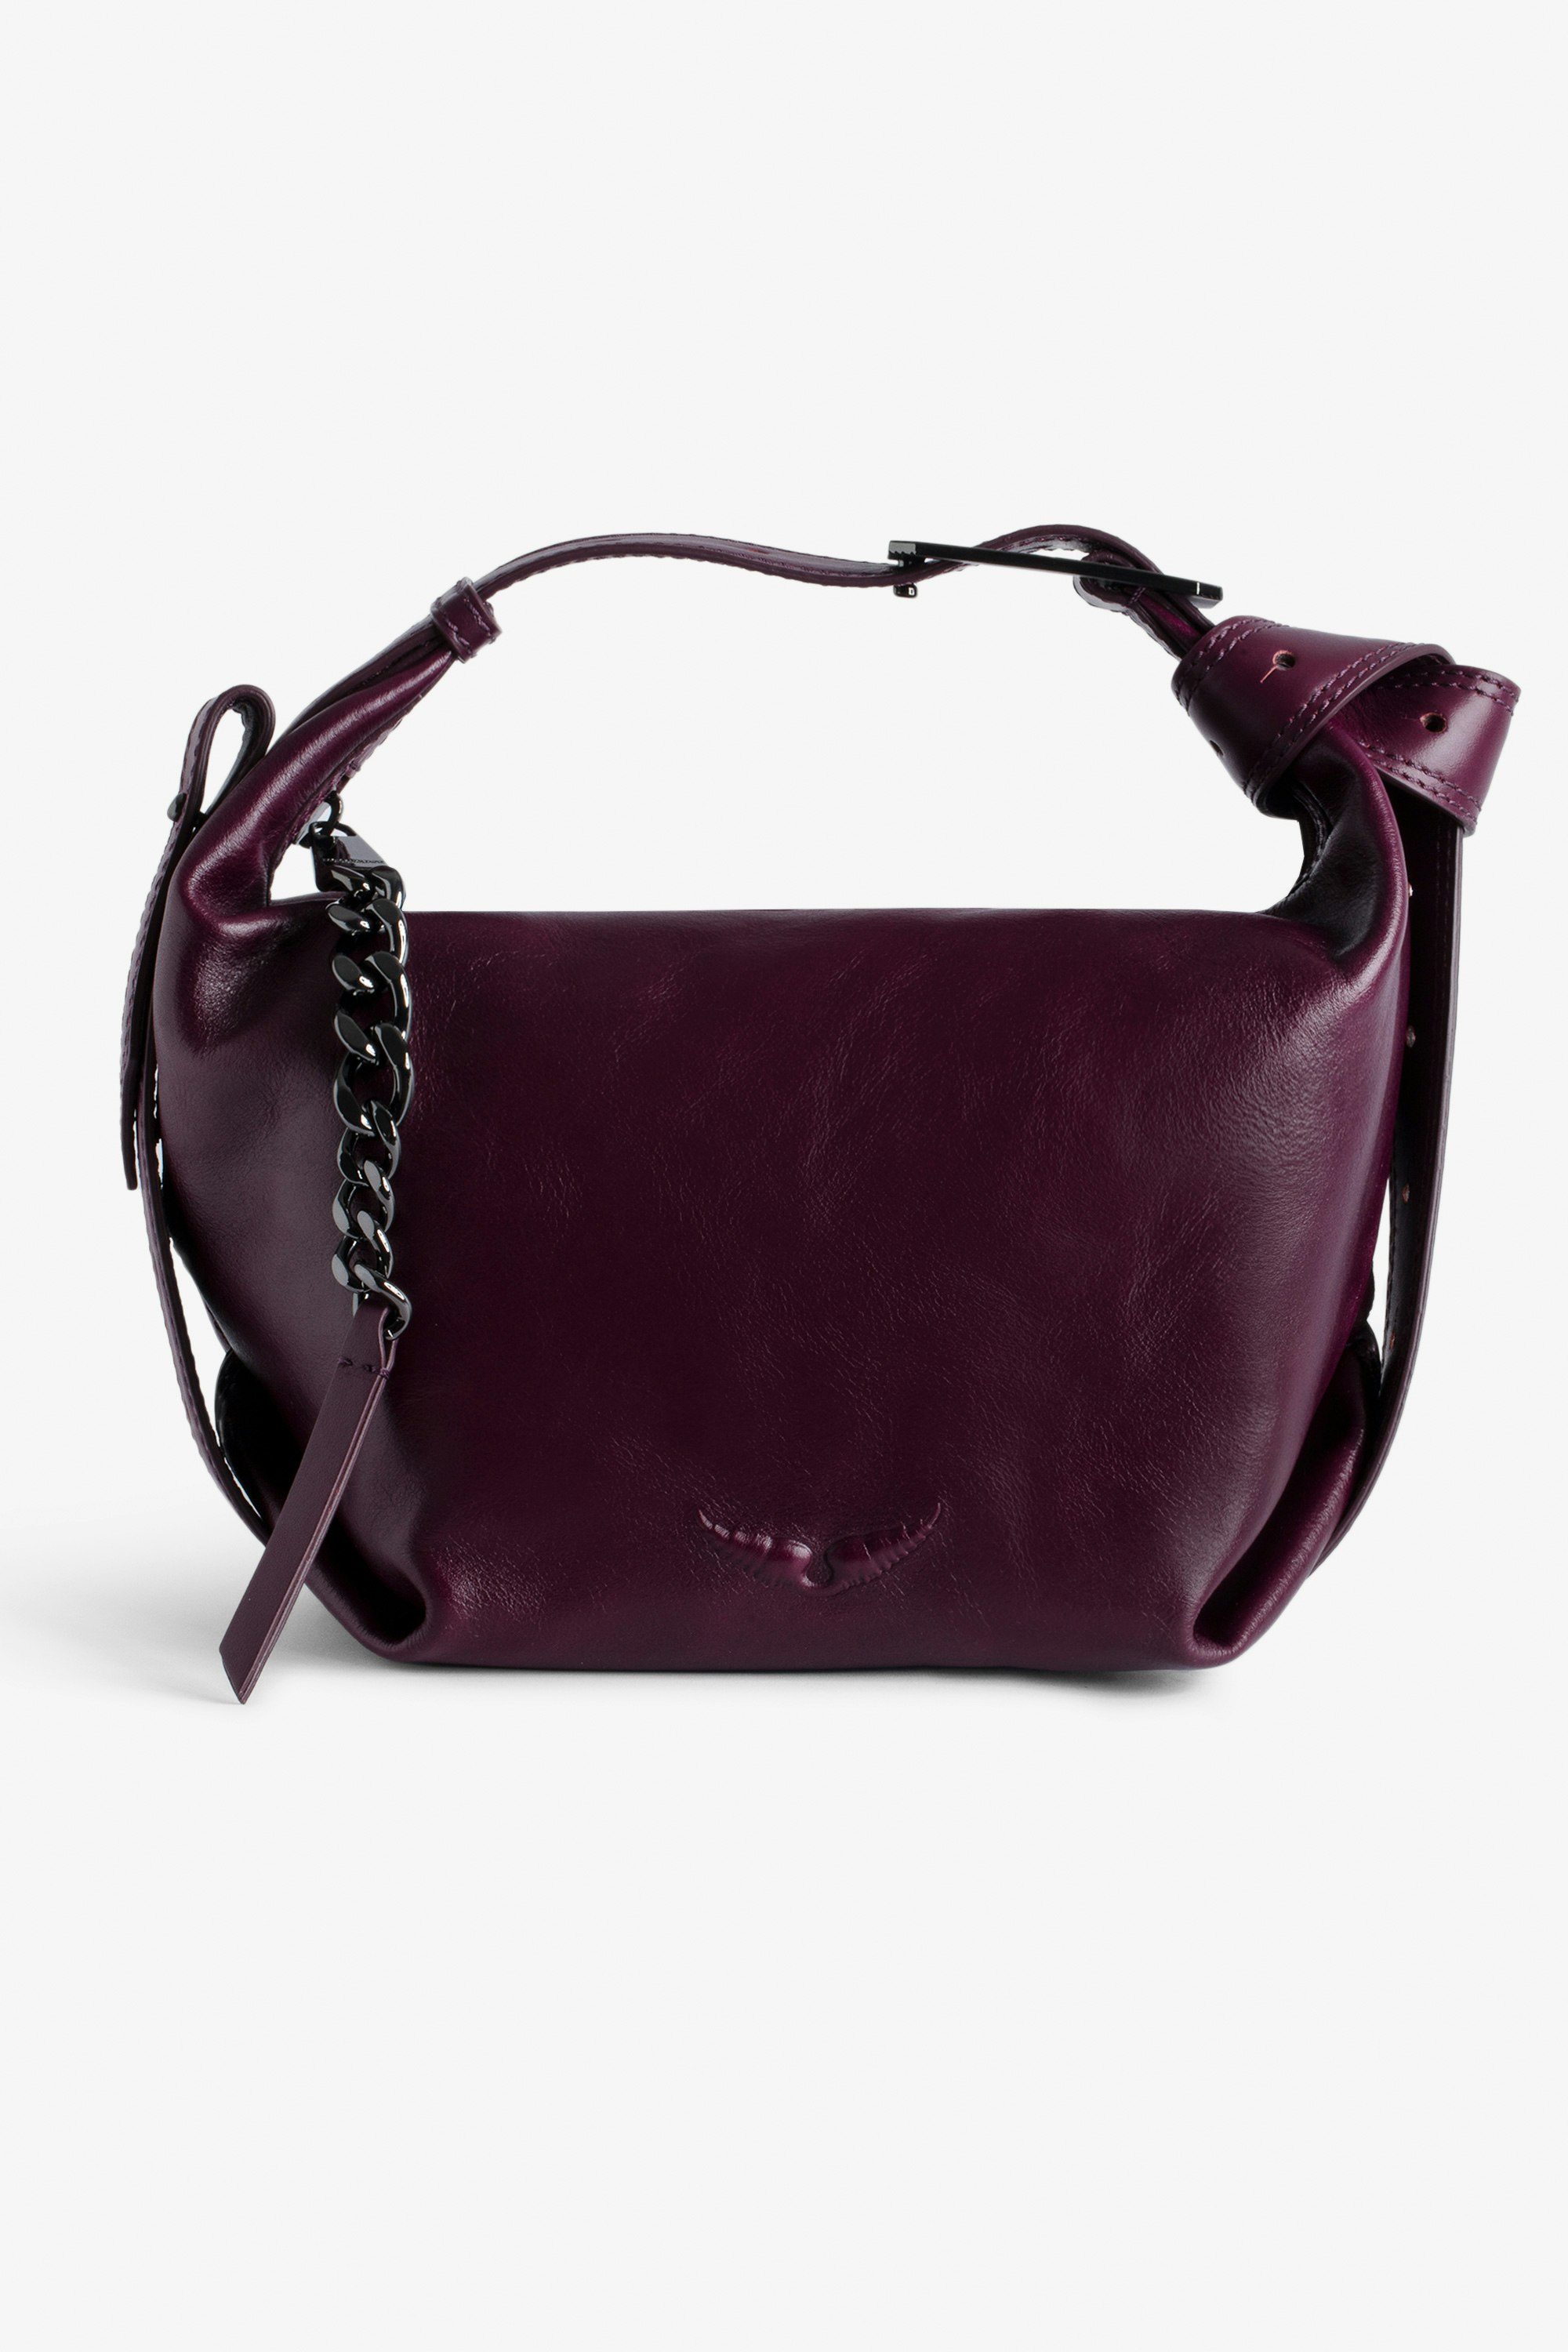 Le Cecilia Bag Woman’s burgundy vegetable-tanned leather bag with shoulder strap and metal C buckle